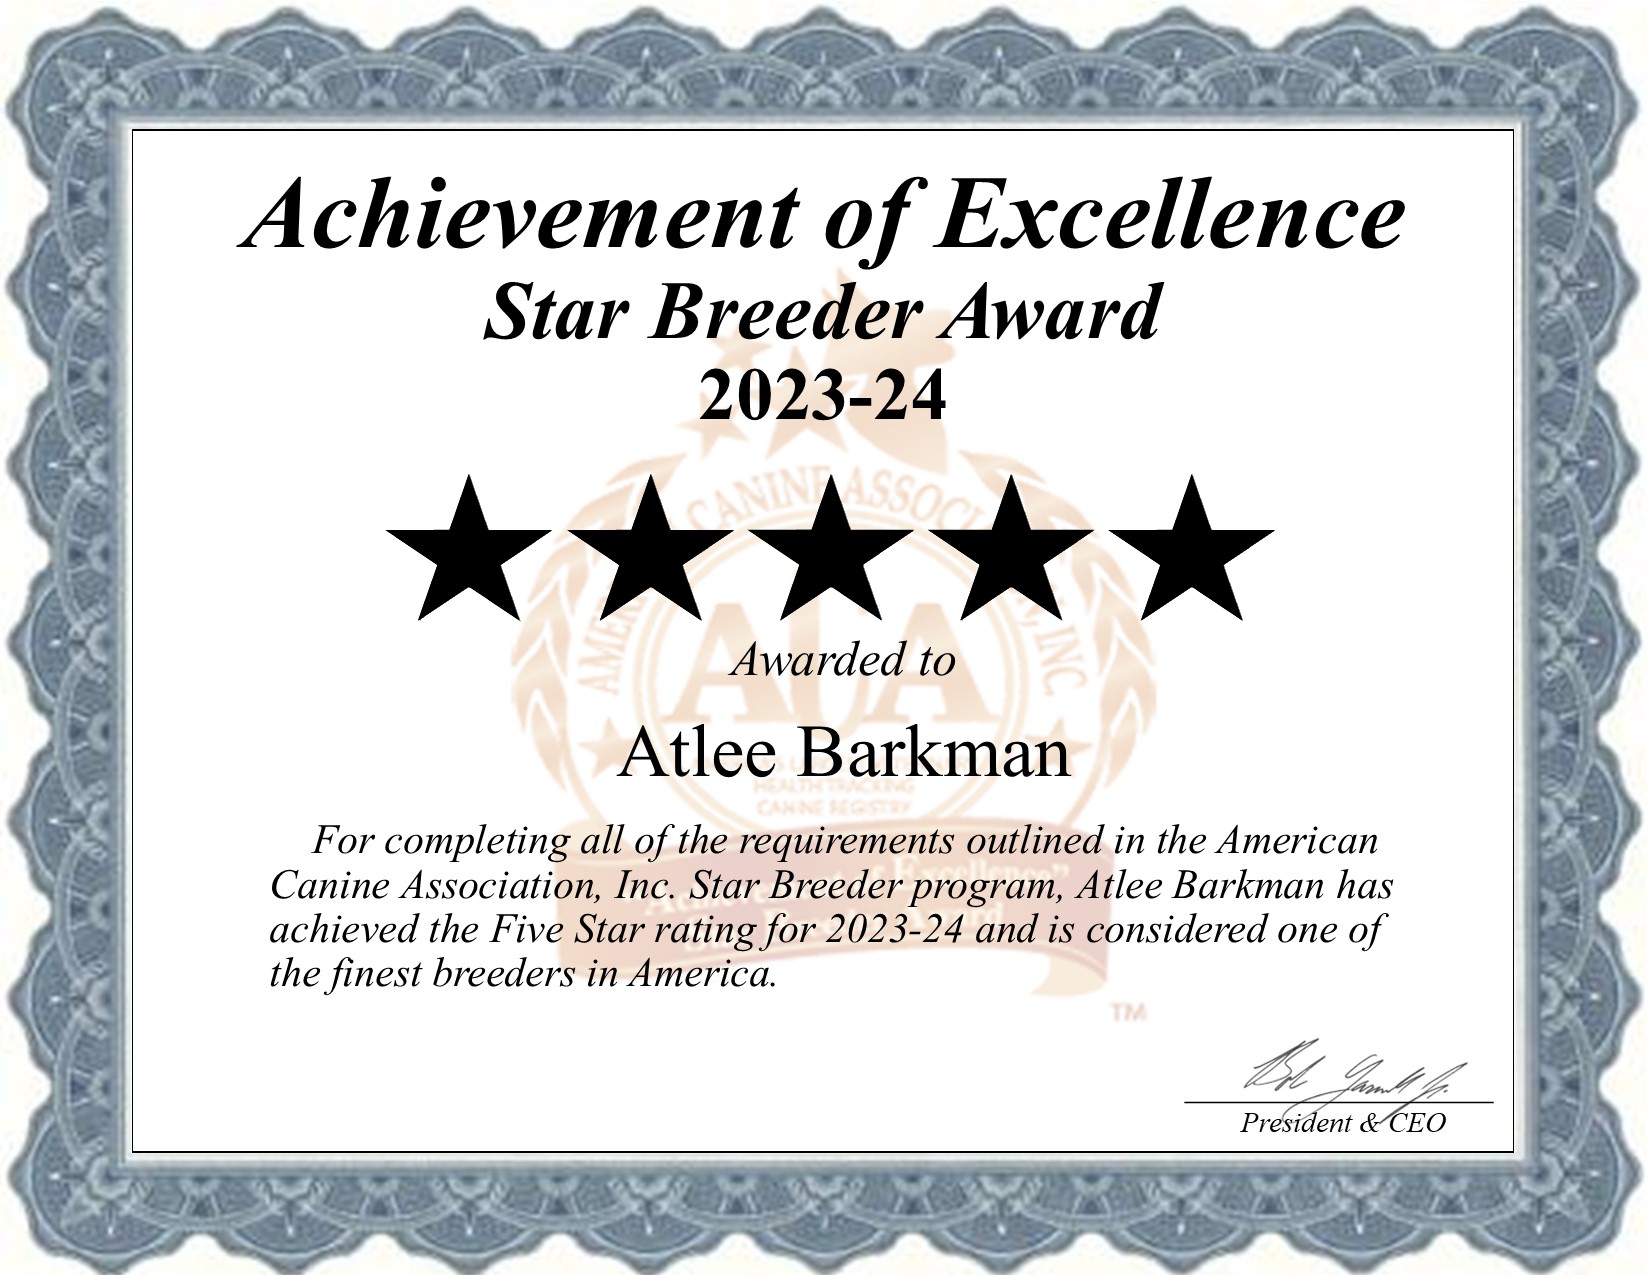 Atlee, Barkman, dog, breeder, star, certificate, Atlee-Barkman, Baltic, OH, Ohio, puppy, dog, kennels, mill, puppymill, usda, 5-star, aca, ica, registered, Poodle, none